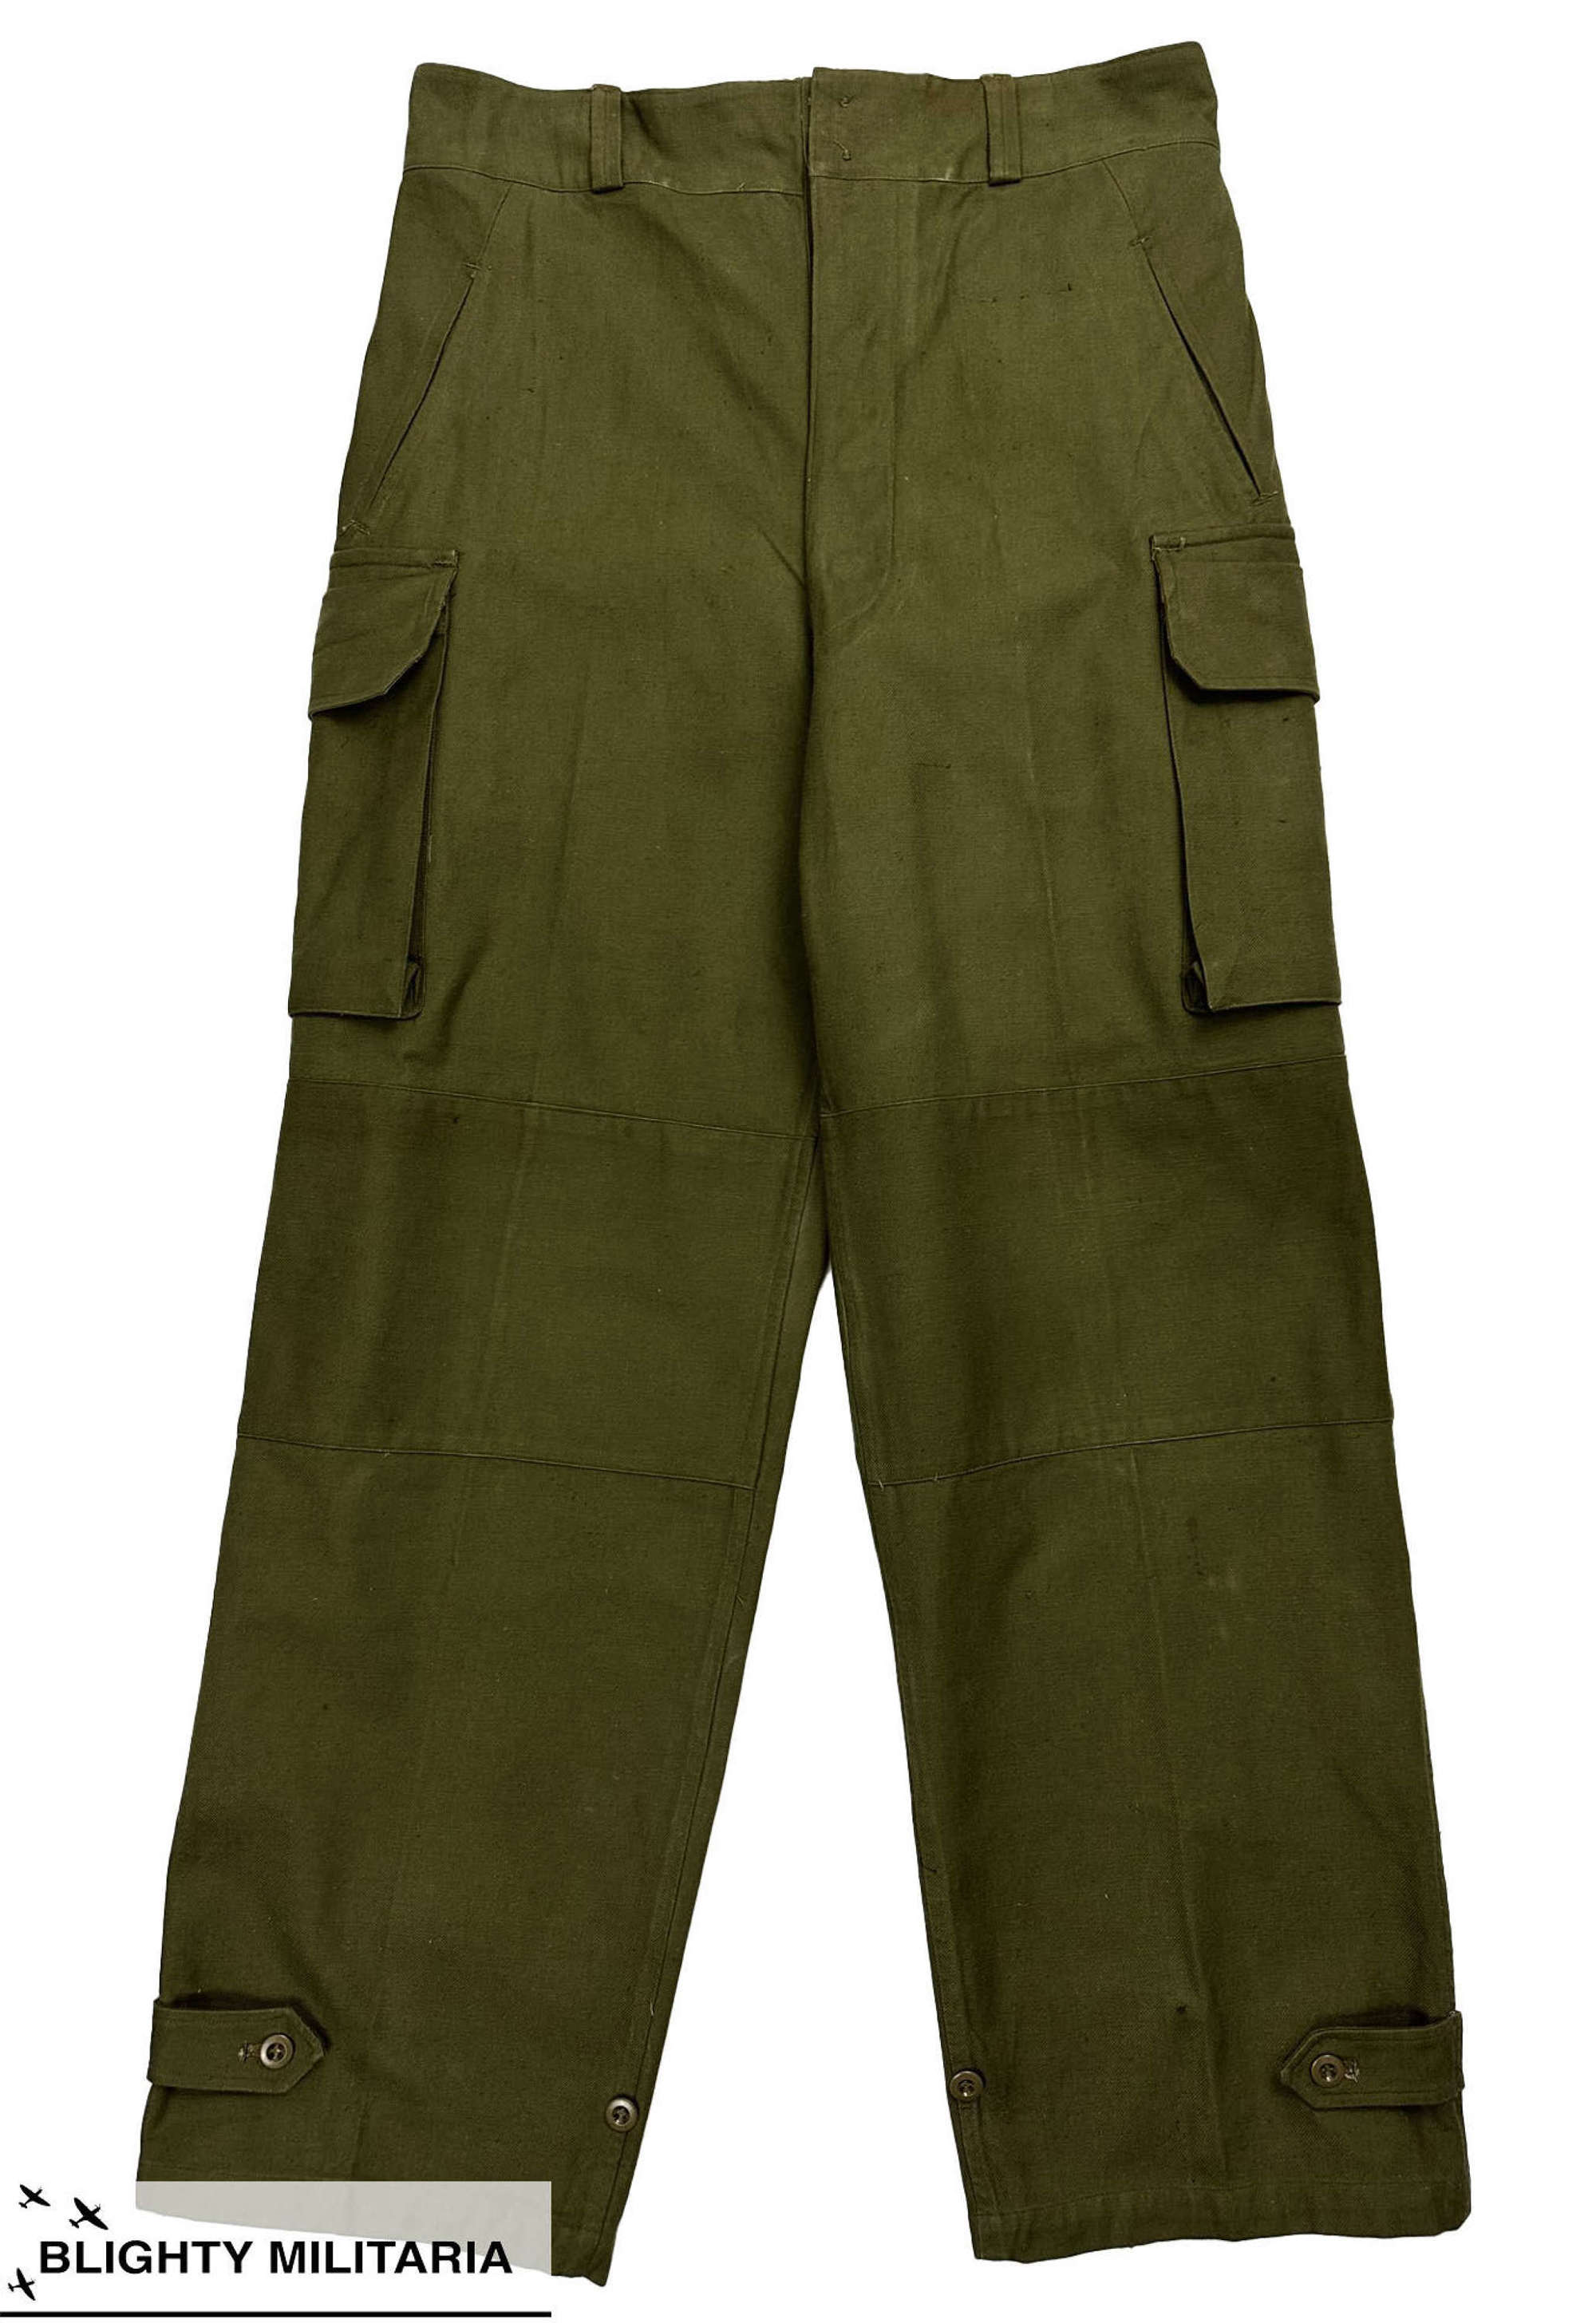 Original 1950s French Army M47 Pattern Combat Trousers - 36 x 32.5